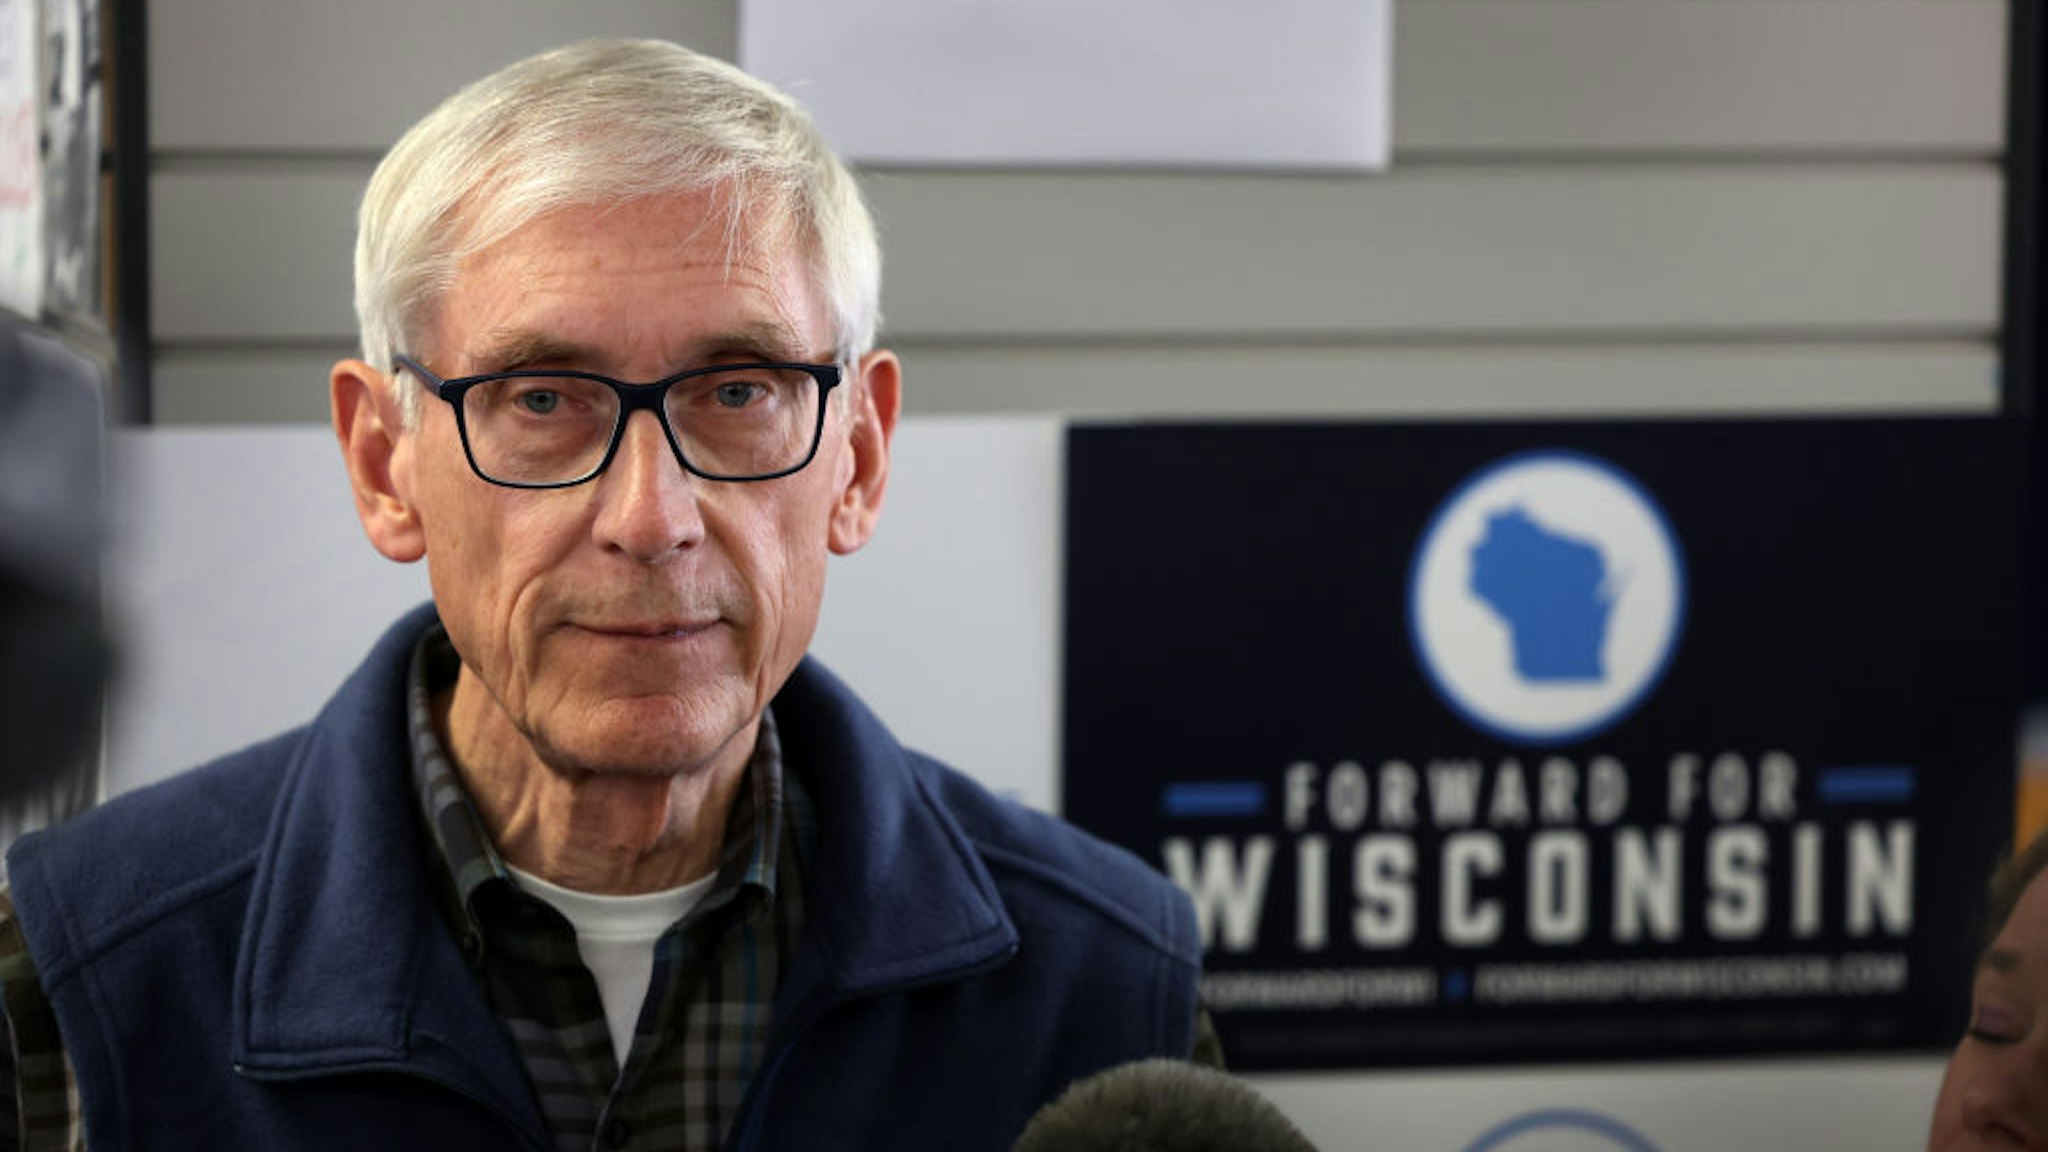 MILWAUKEE, WISCONSIN - NOVEMBER 07: Wisconsin Governor Tony Evers speaks to the press during a canvas launch event on November 7, 2022 in Milwaukee, Wisconsin. Evers, a Democrat, is in a tight race with his Republican challenger Tim Michels heading into tomorrow's election.